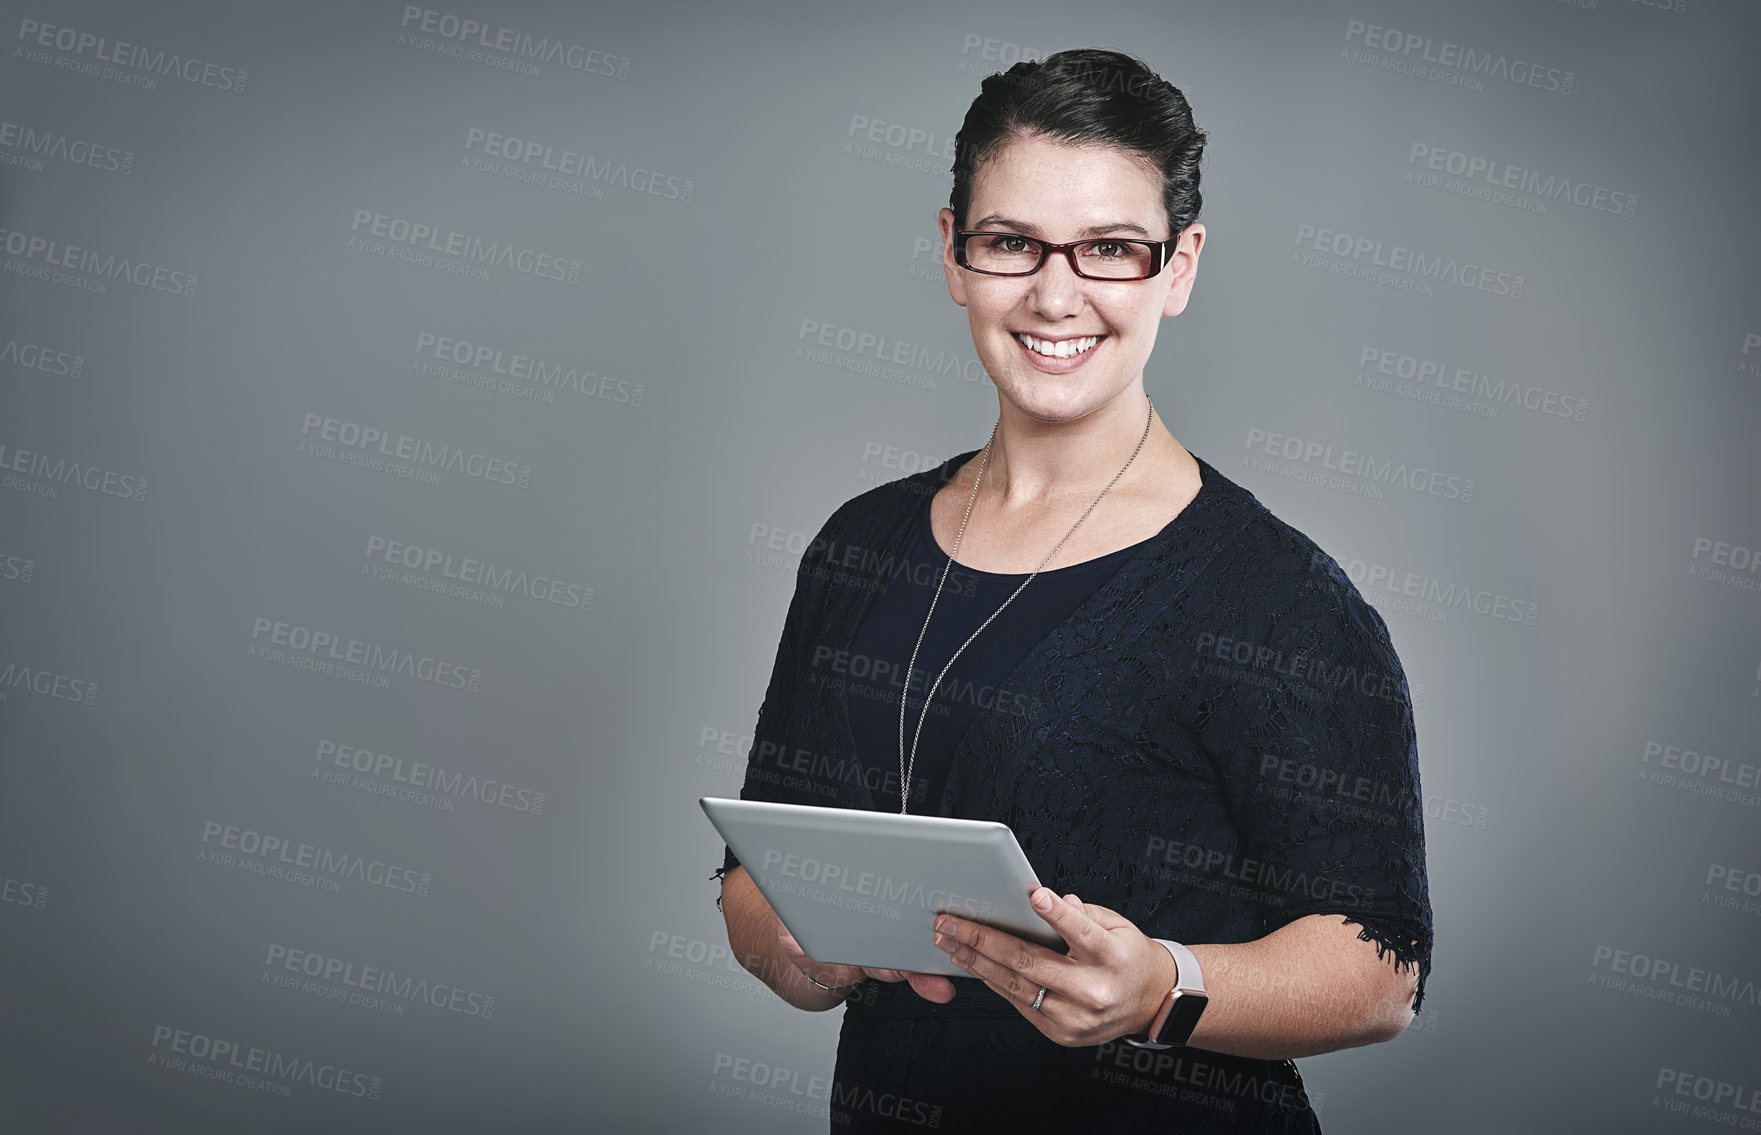 Buy stock photo Studio portrait of a young businesswoman using a digital tablet against a grey background